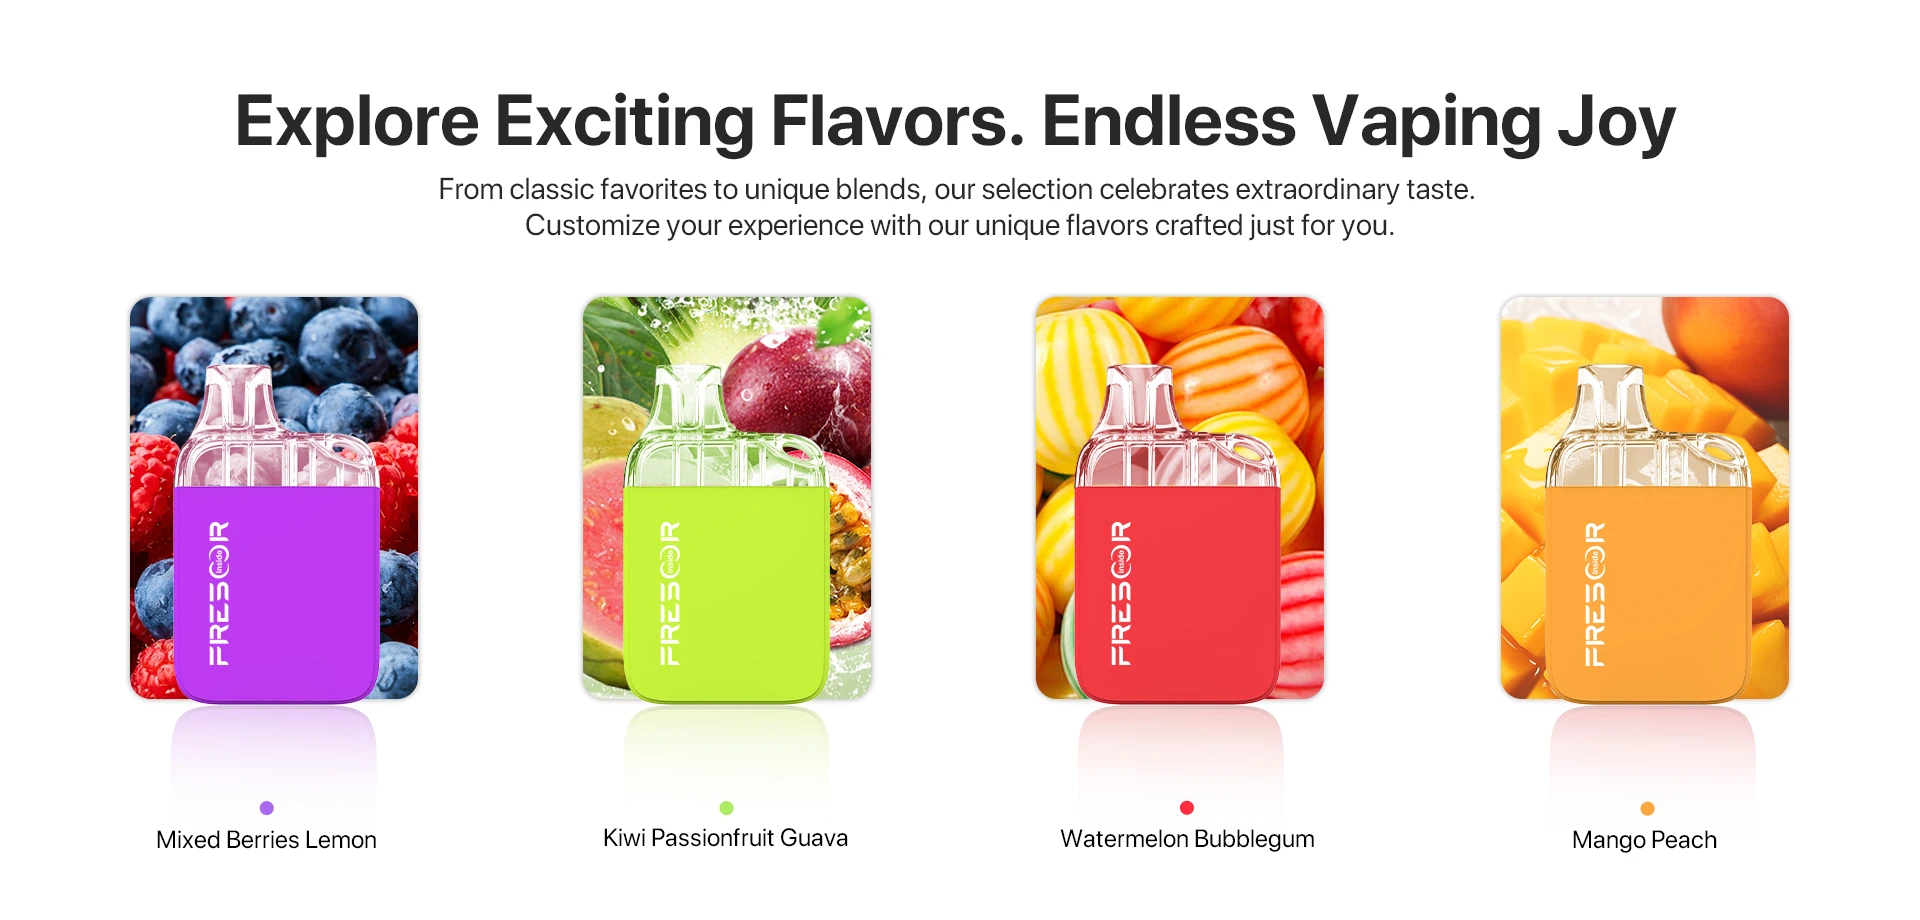 Explore Exciting Flavors. Endless Vaping Joy From classic favorites to unique blends, our selection celebrates extraordinary taste. Customize your experience with our unique flavors craf